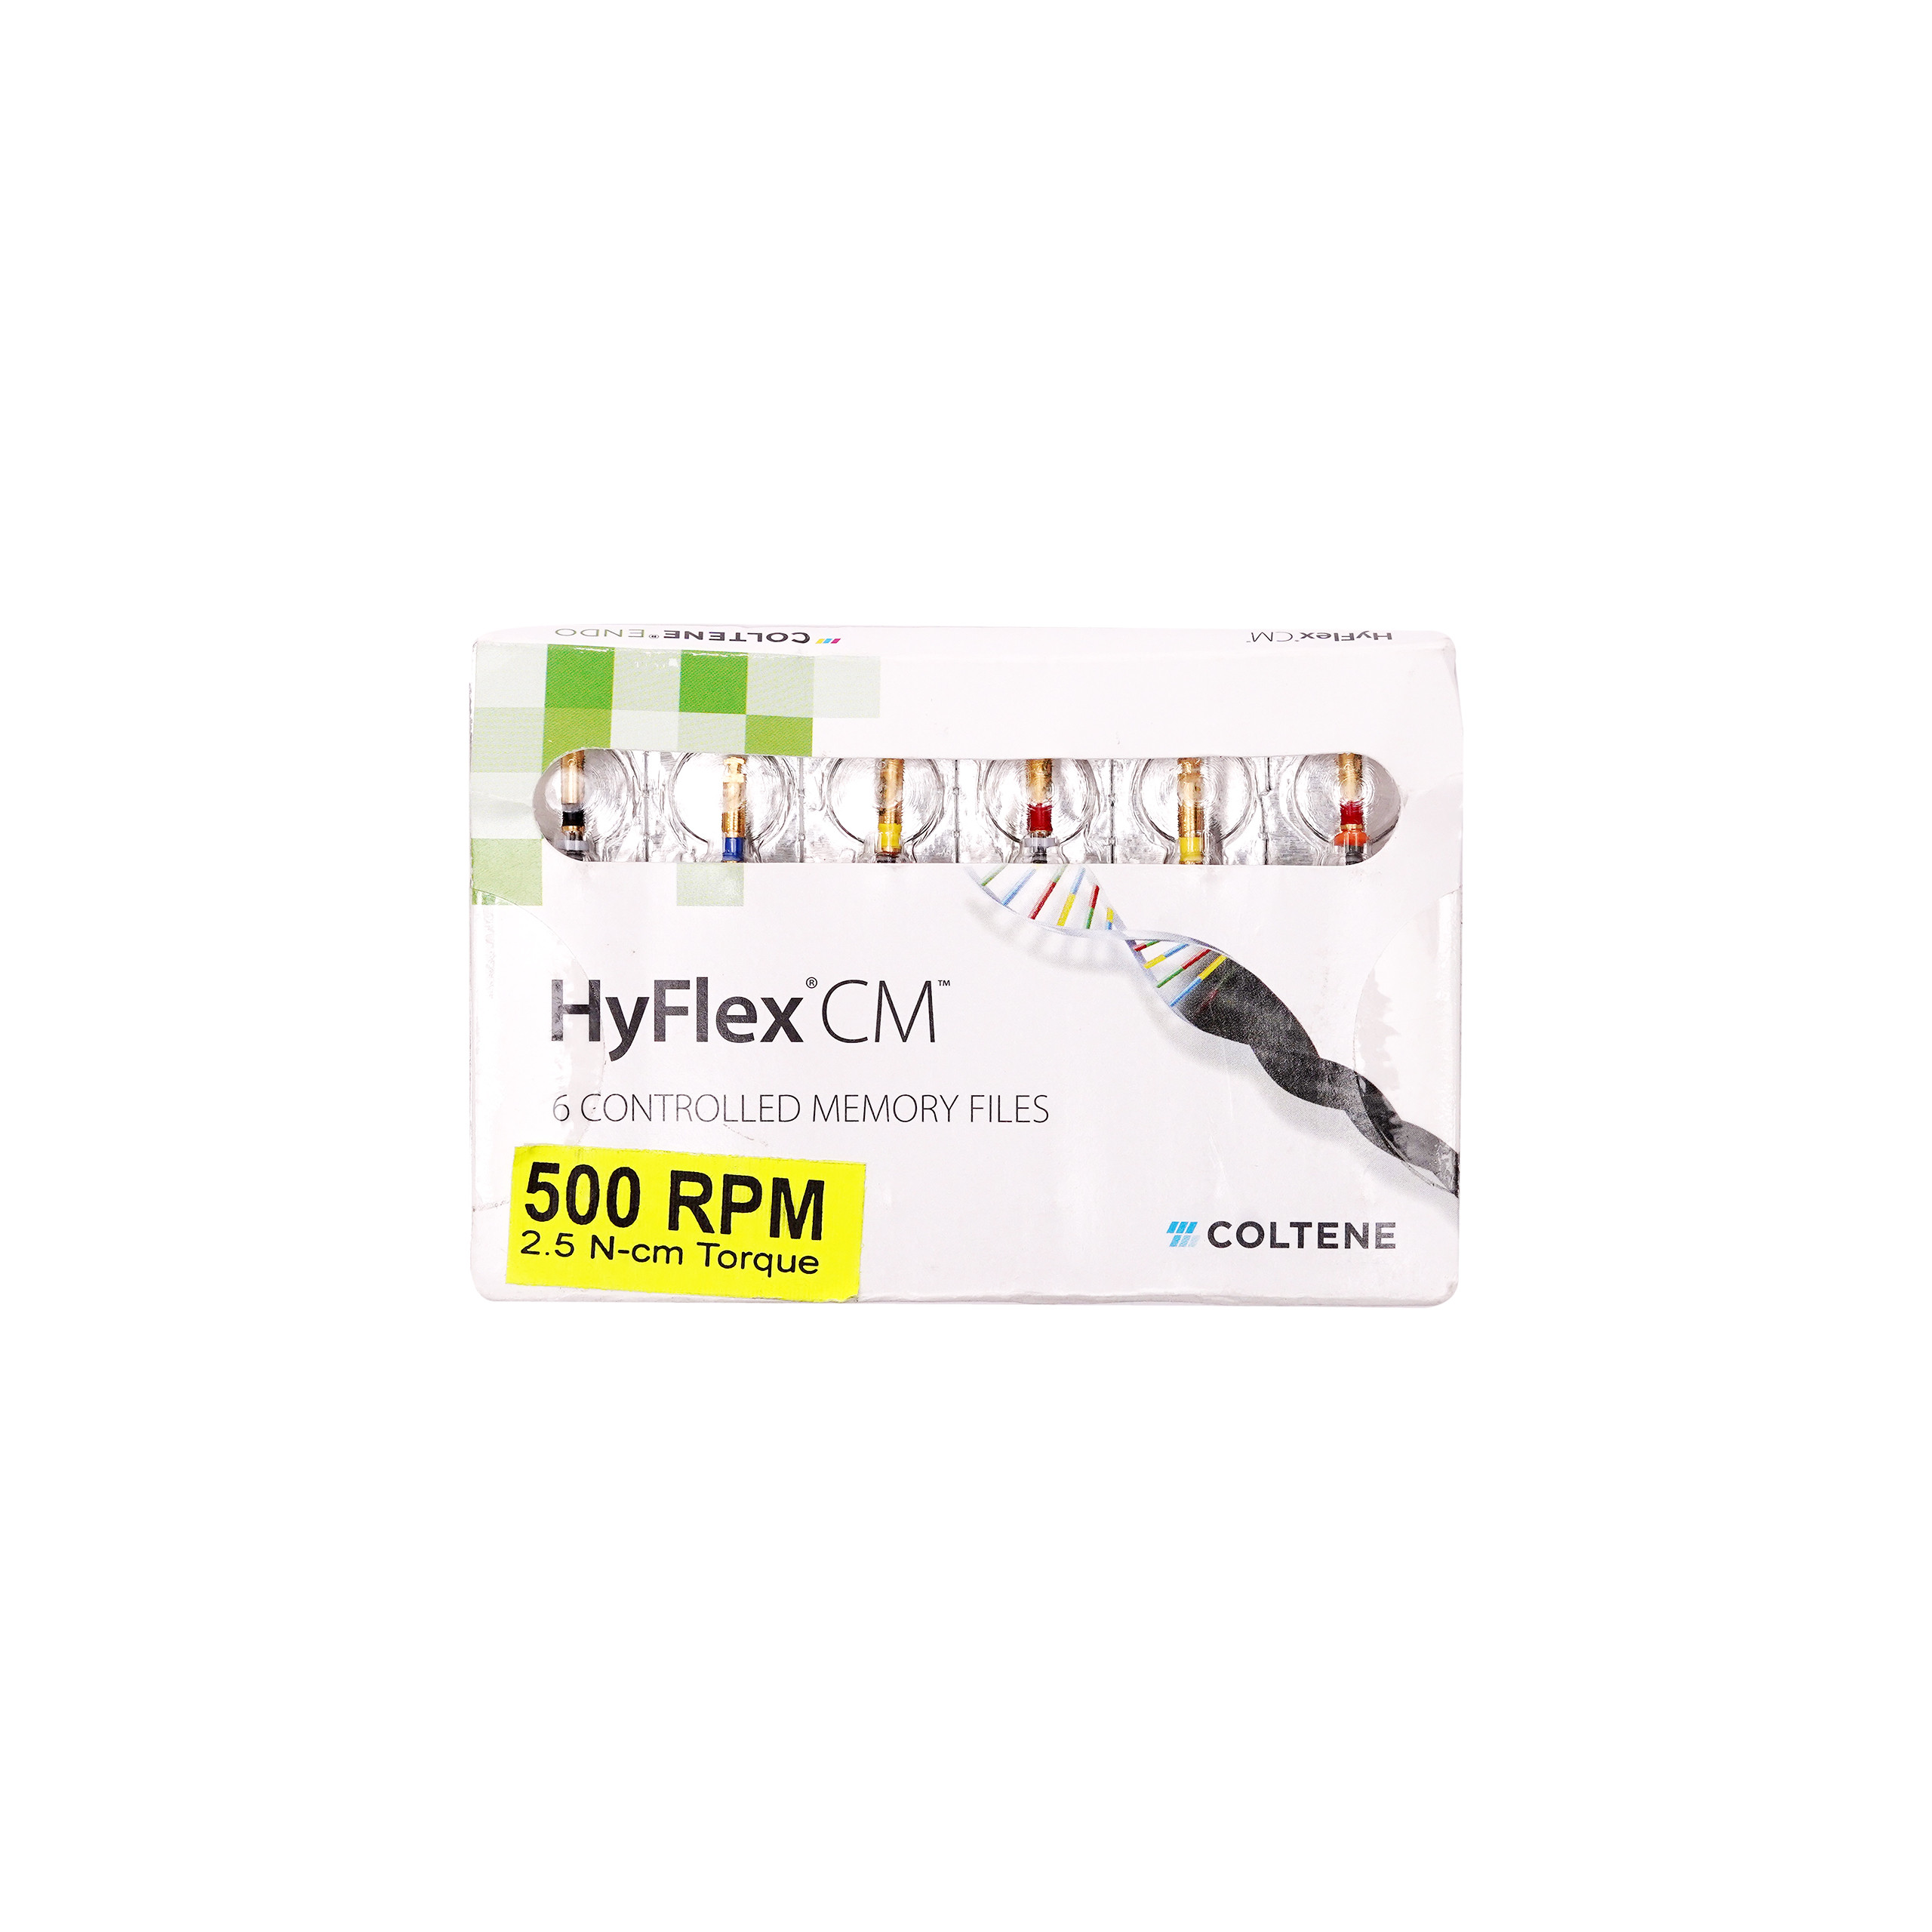 Hyflex Controlled Memory Files